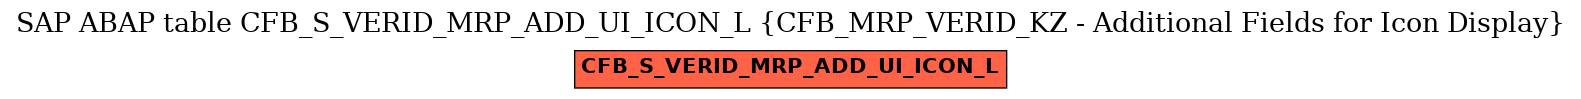 E-R Diagram for table CFB_S_VERID_MRP_ADD_UI_ICON_L (CFB_MRP_VERID_KZ - Additional Fields for Icon Display)